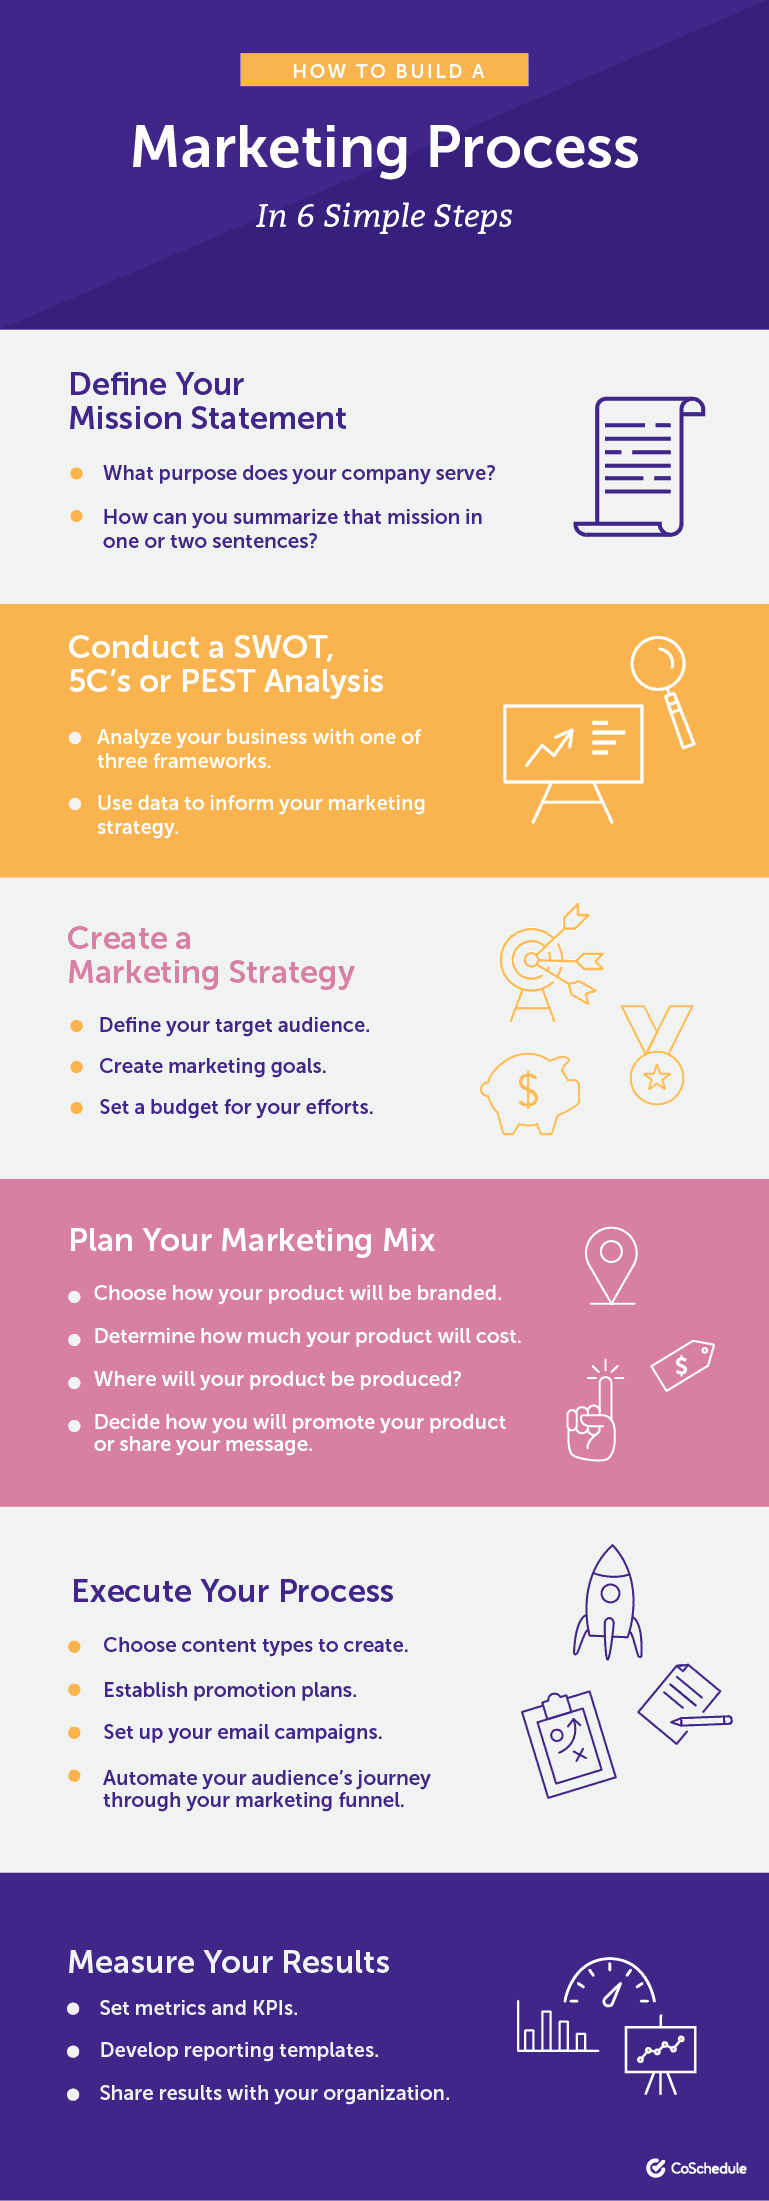 Building a Marketing Process in 6 Steps - Infographic